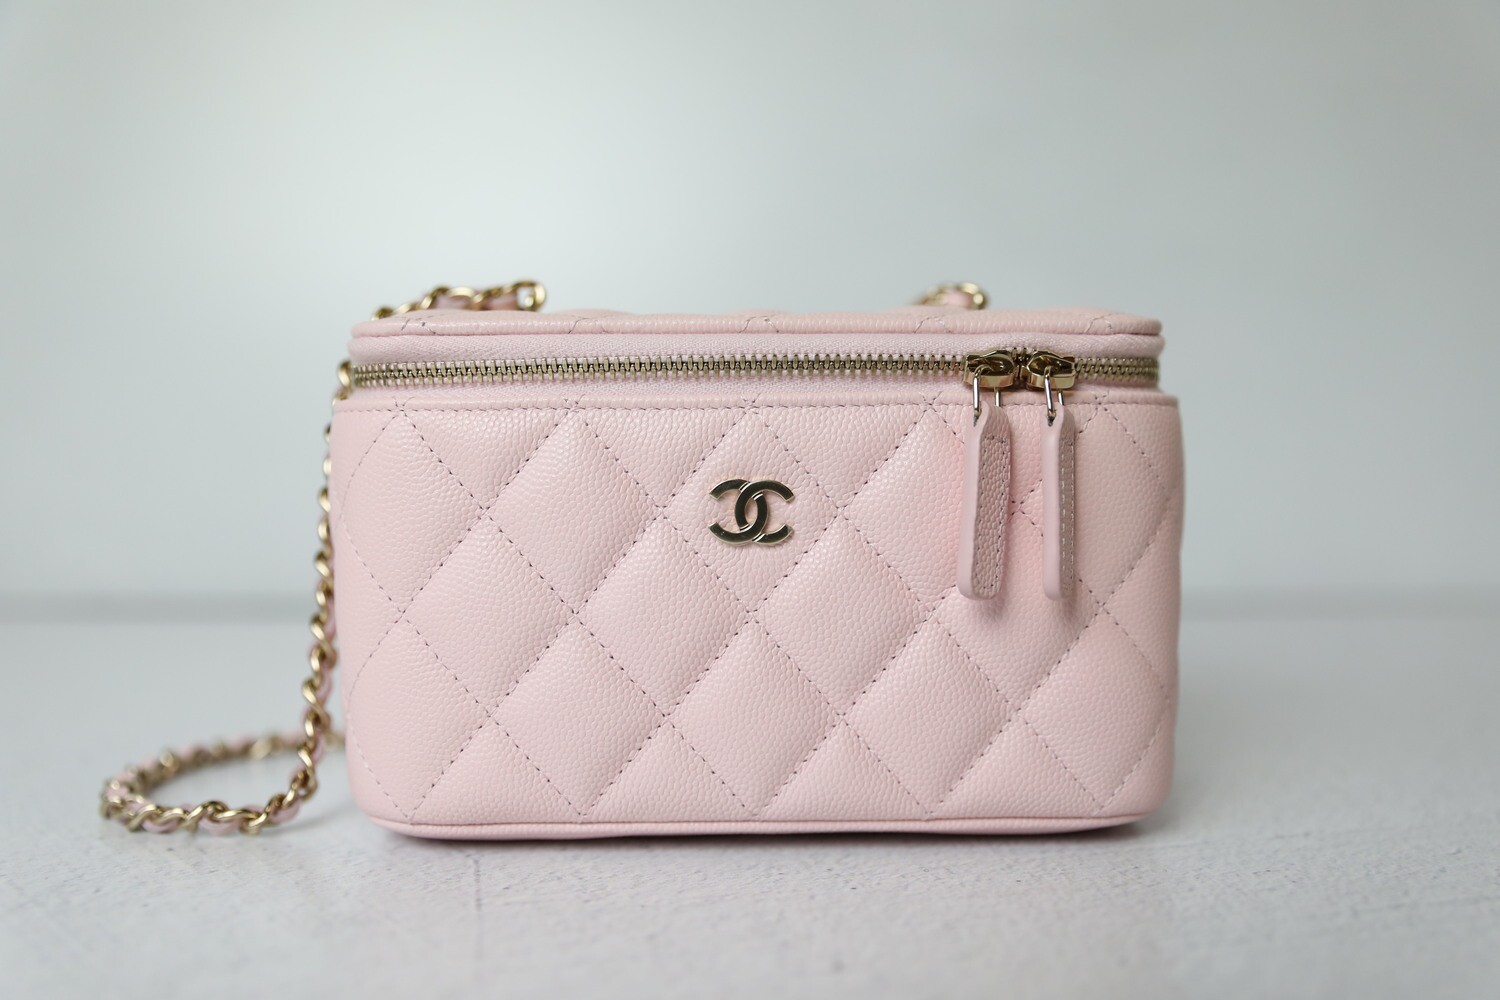 Chanel Round Vanity with Chain, Pink Caviar with Gold Hardware, New in Box  GA001